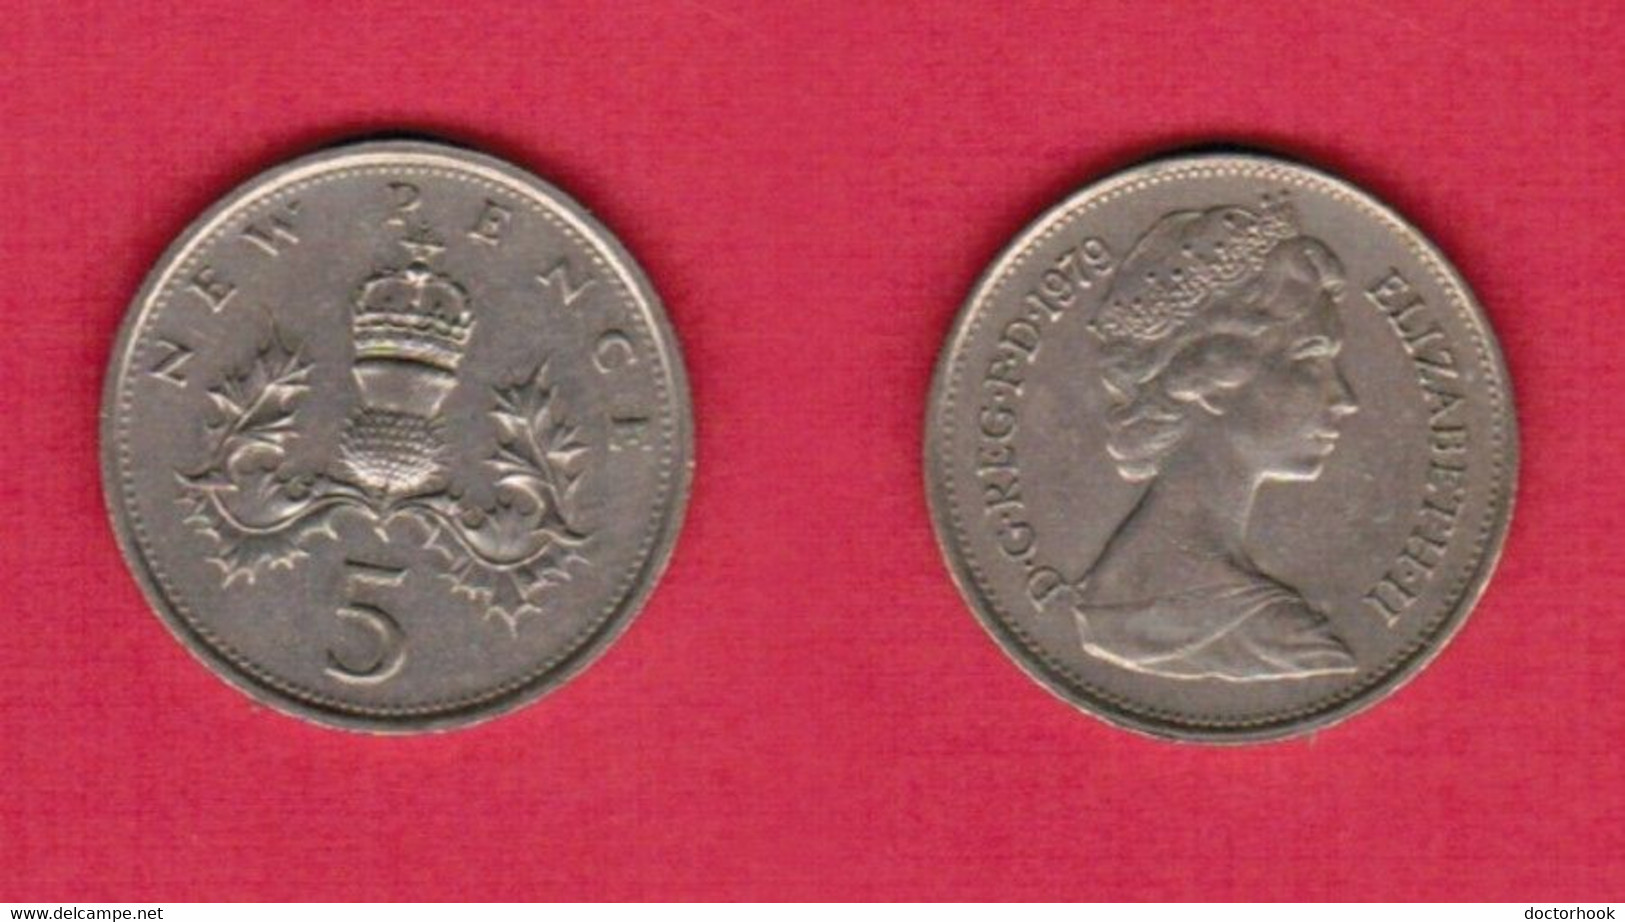 GREAT BRITAIN   5 NEW PENCE 1979 (KM # 911) #6605 - 5 Pence & 5 New Pence